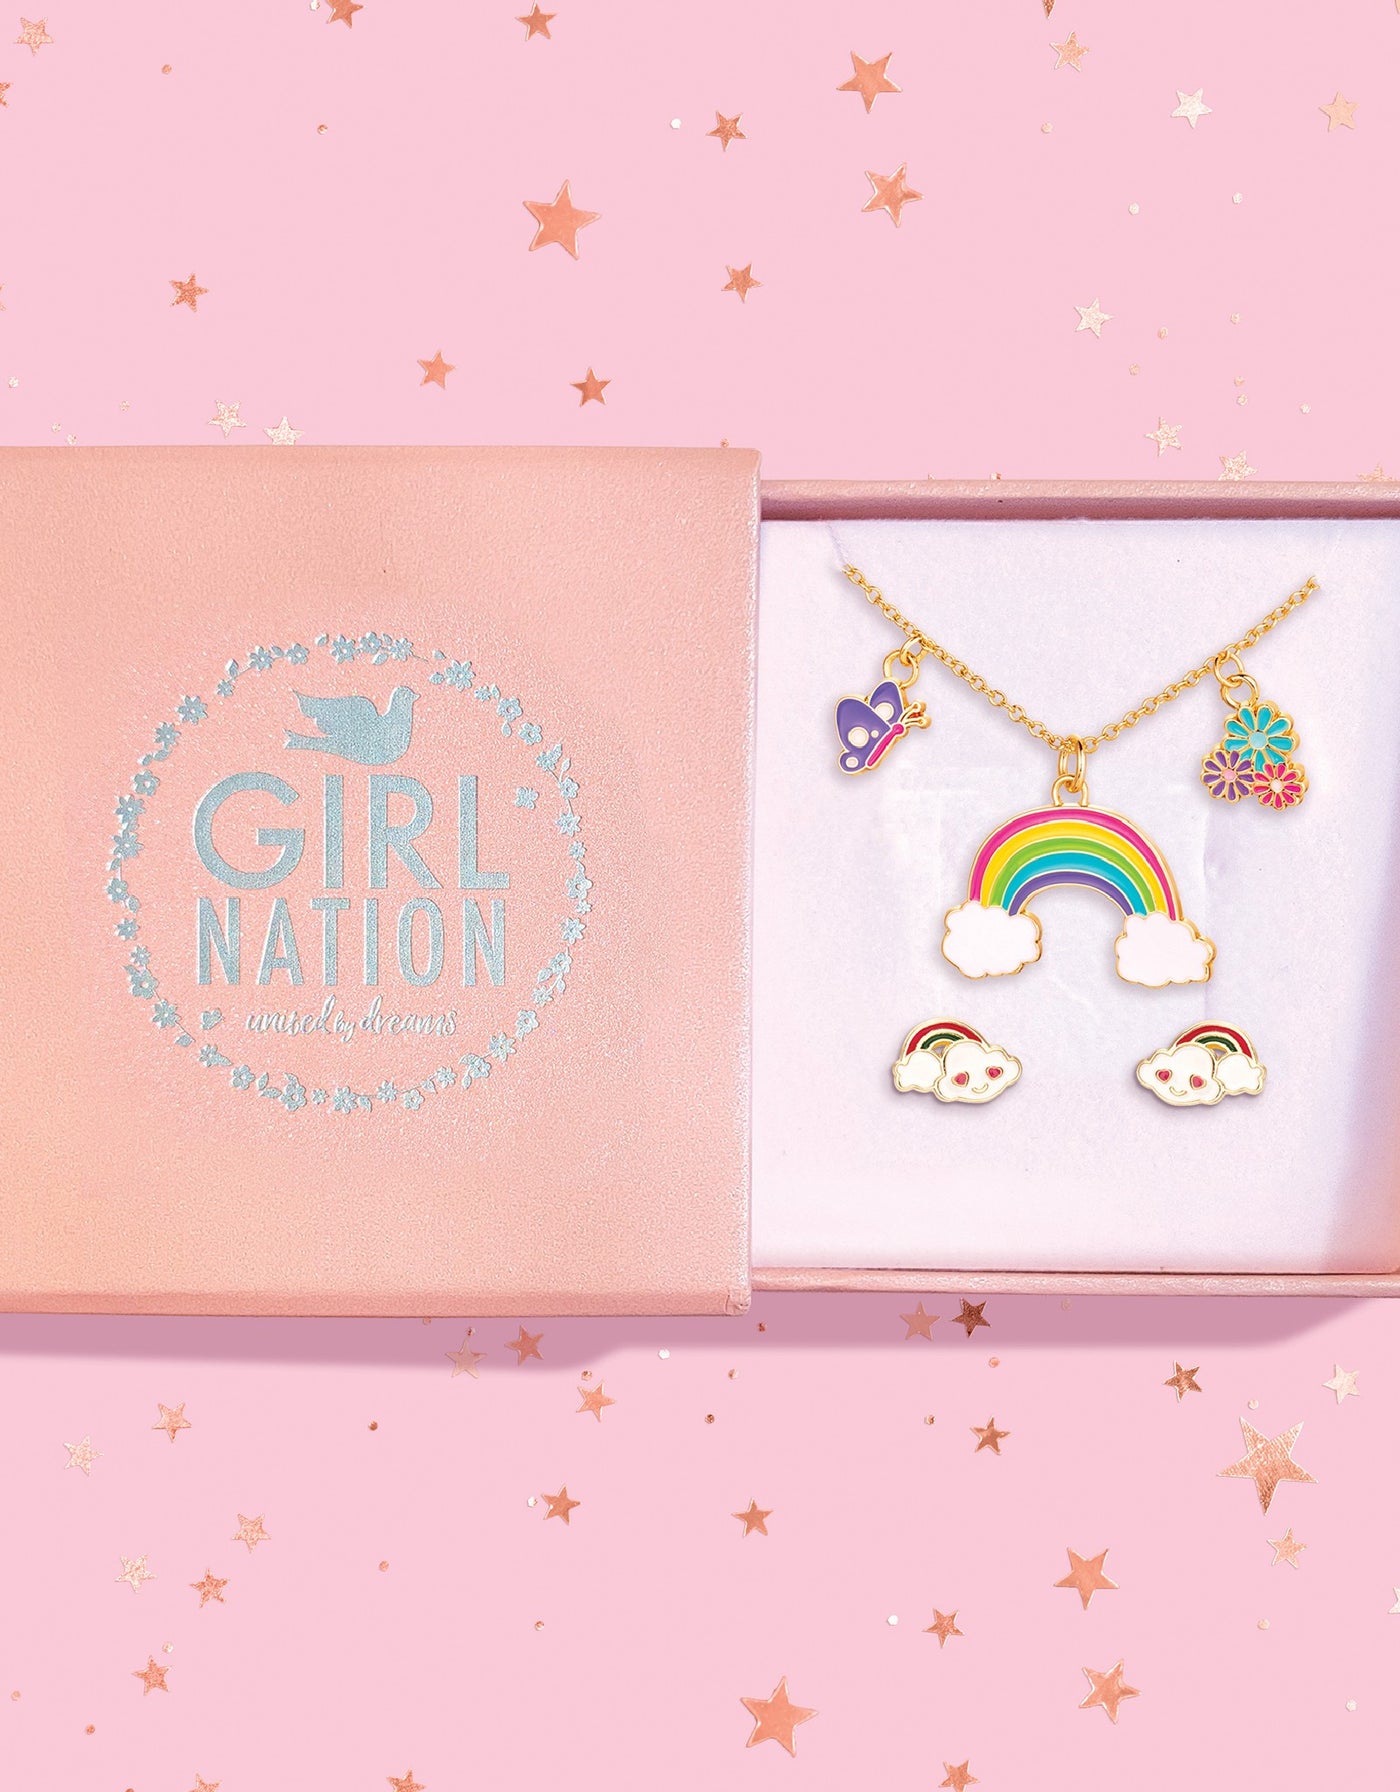 Fantasy necklace and earrings gift set - Rainbow and cloud - Girl Nation